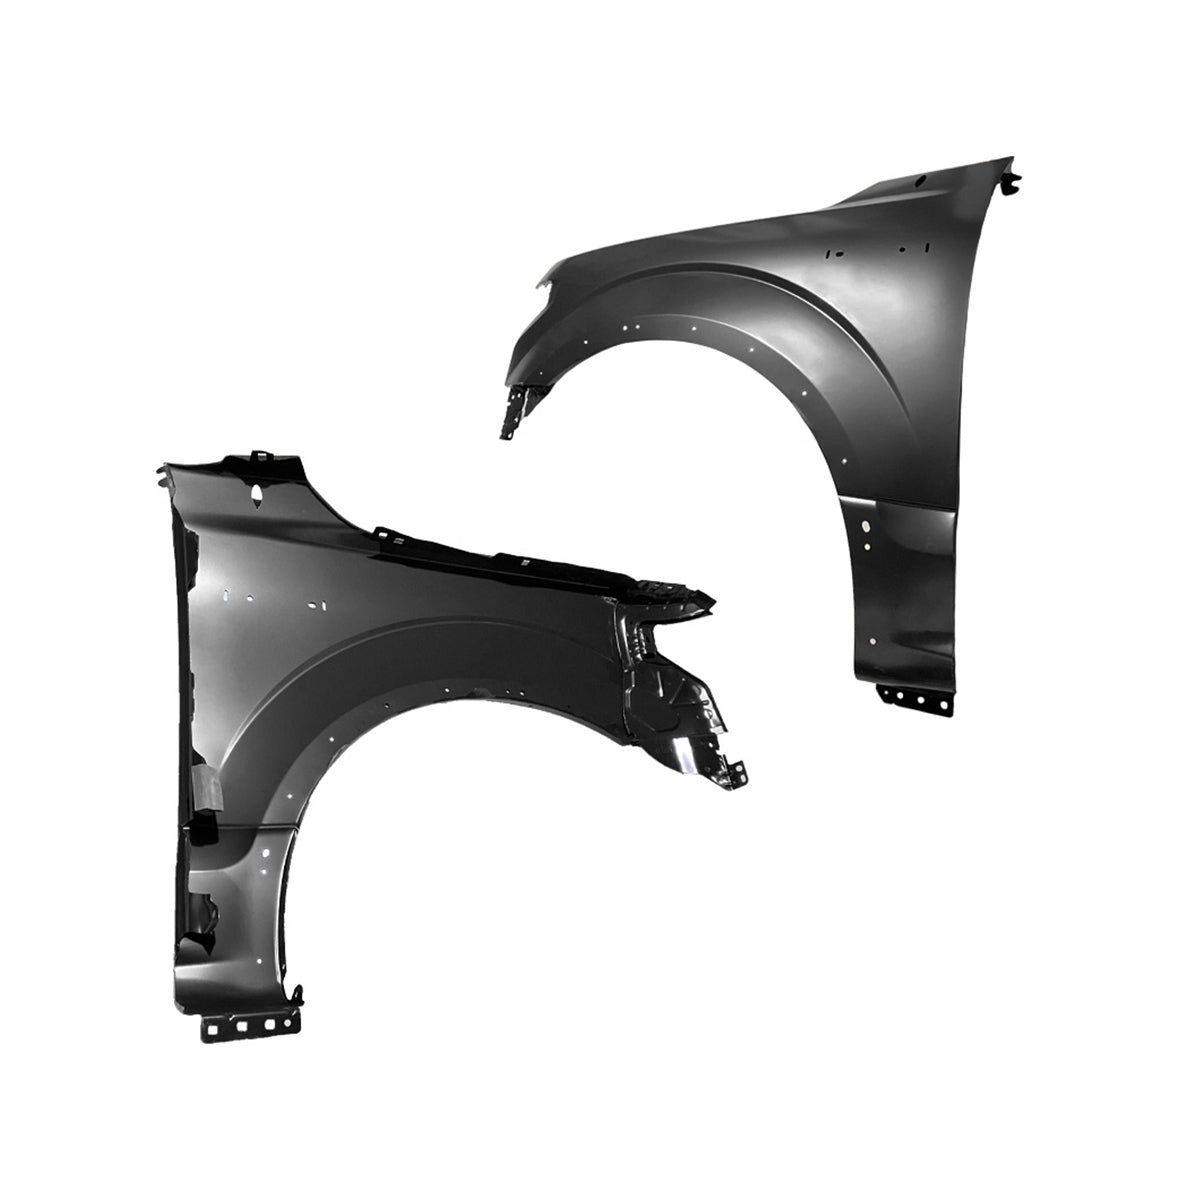 Replacement FRONT FENDER, LH, 2015-2020 Ford F150, (Steel)